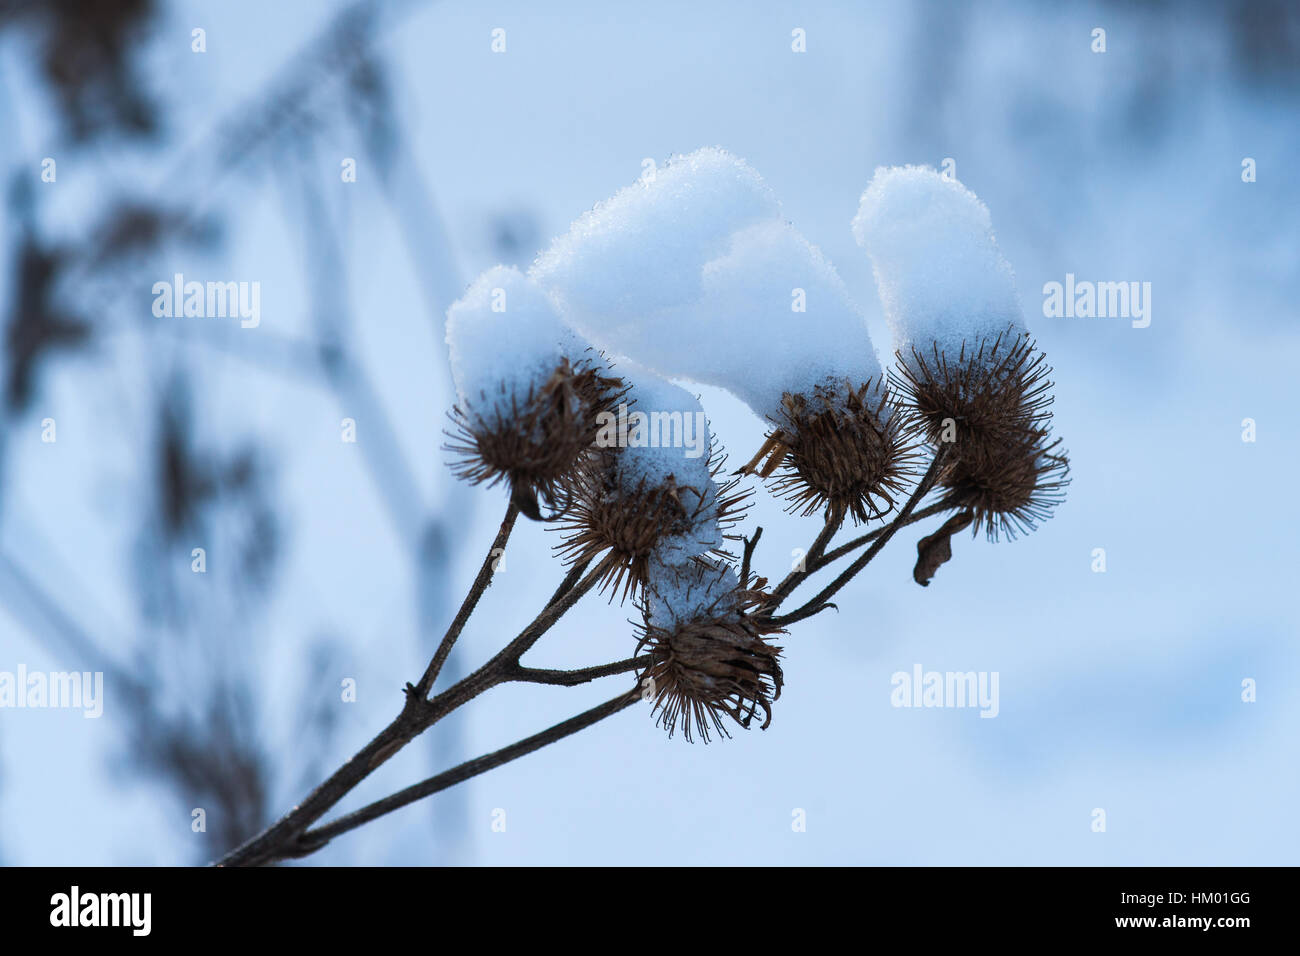 Dry common burdock with large caps of snow against white and bluish background Stock Photo